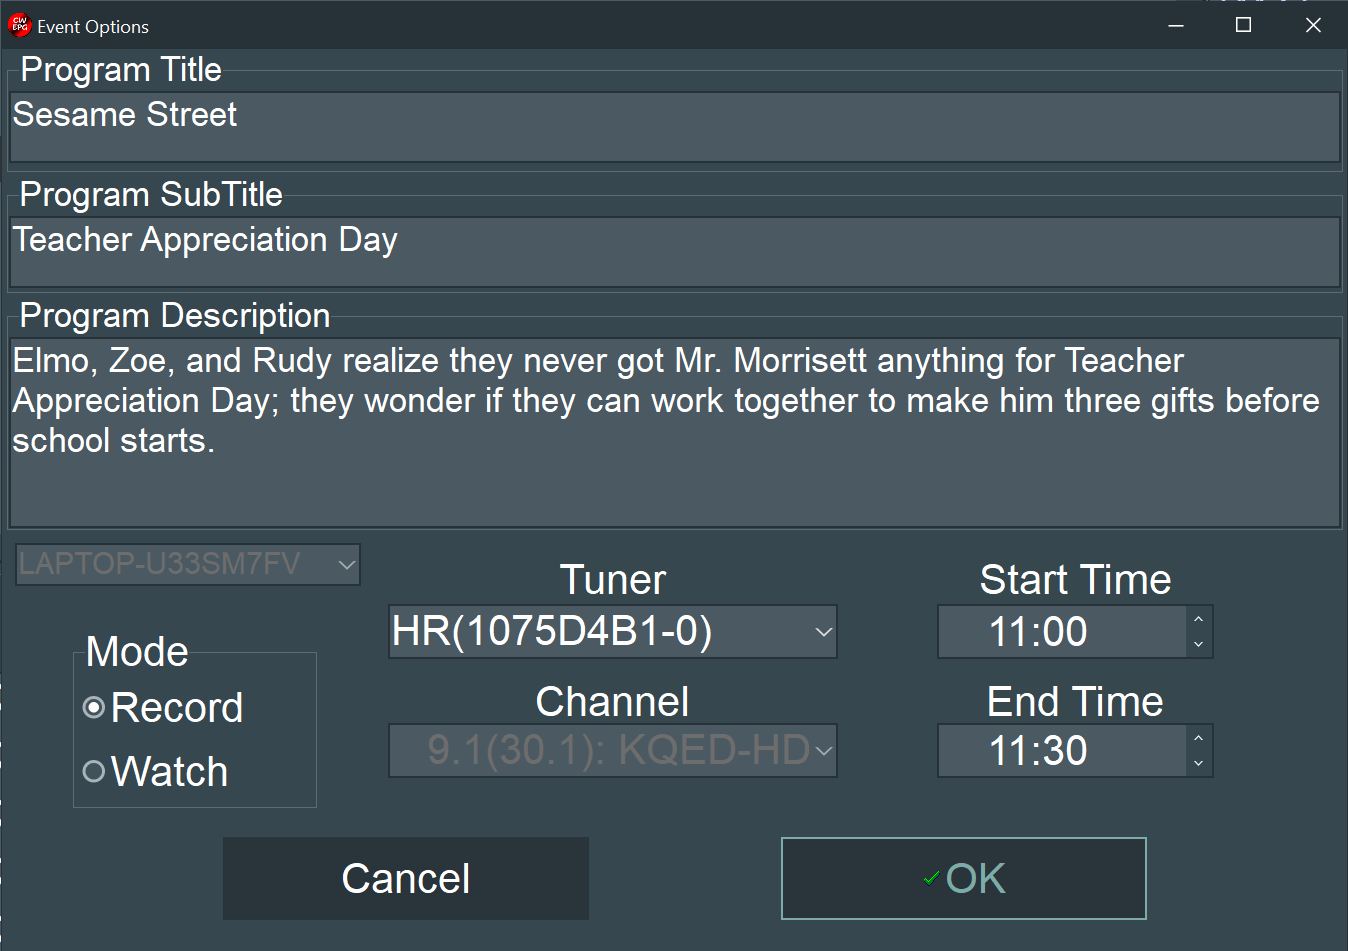 Options Menu for "VCR Item" and "TitanTV" buttons on Scheduled Items tab